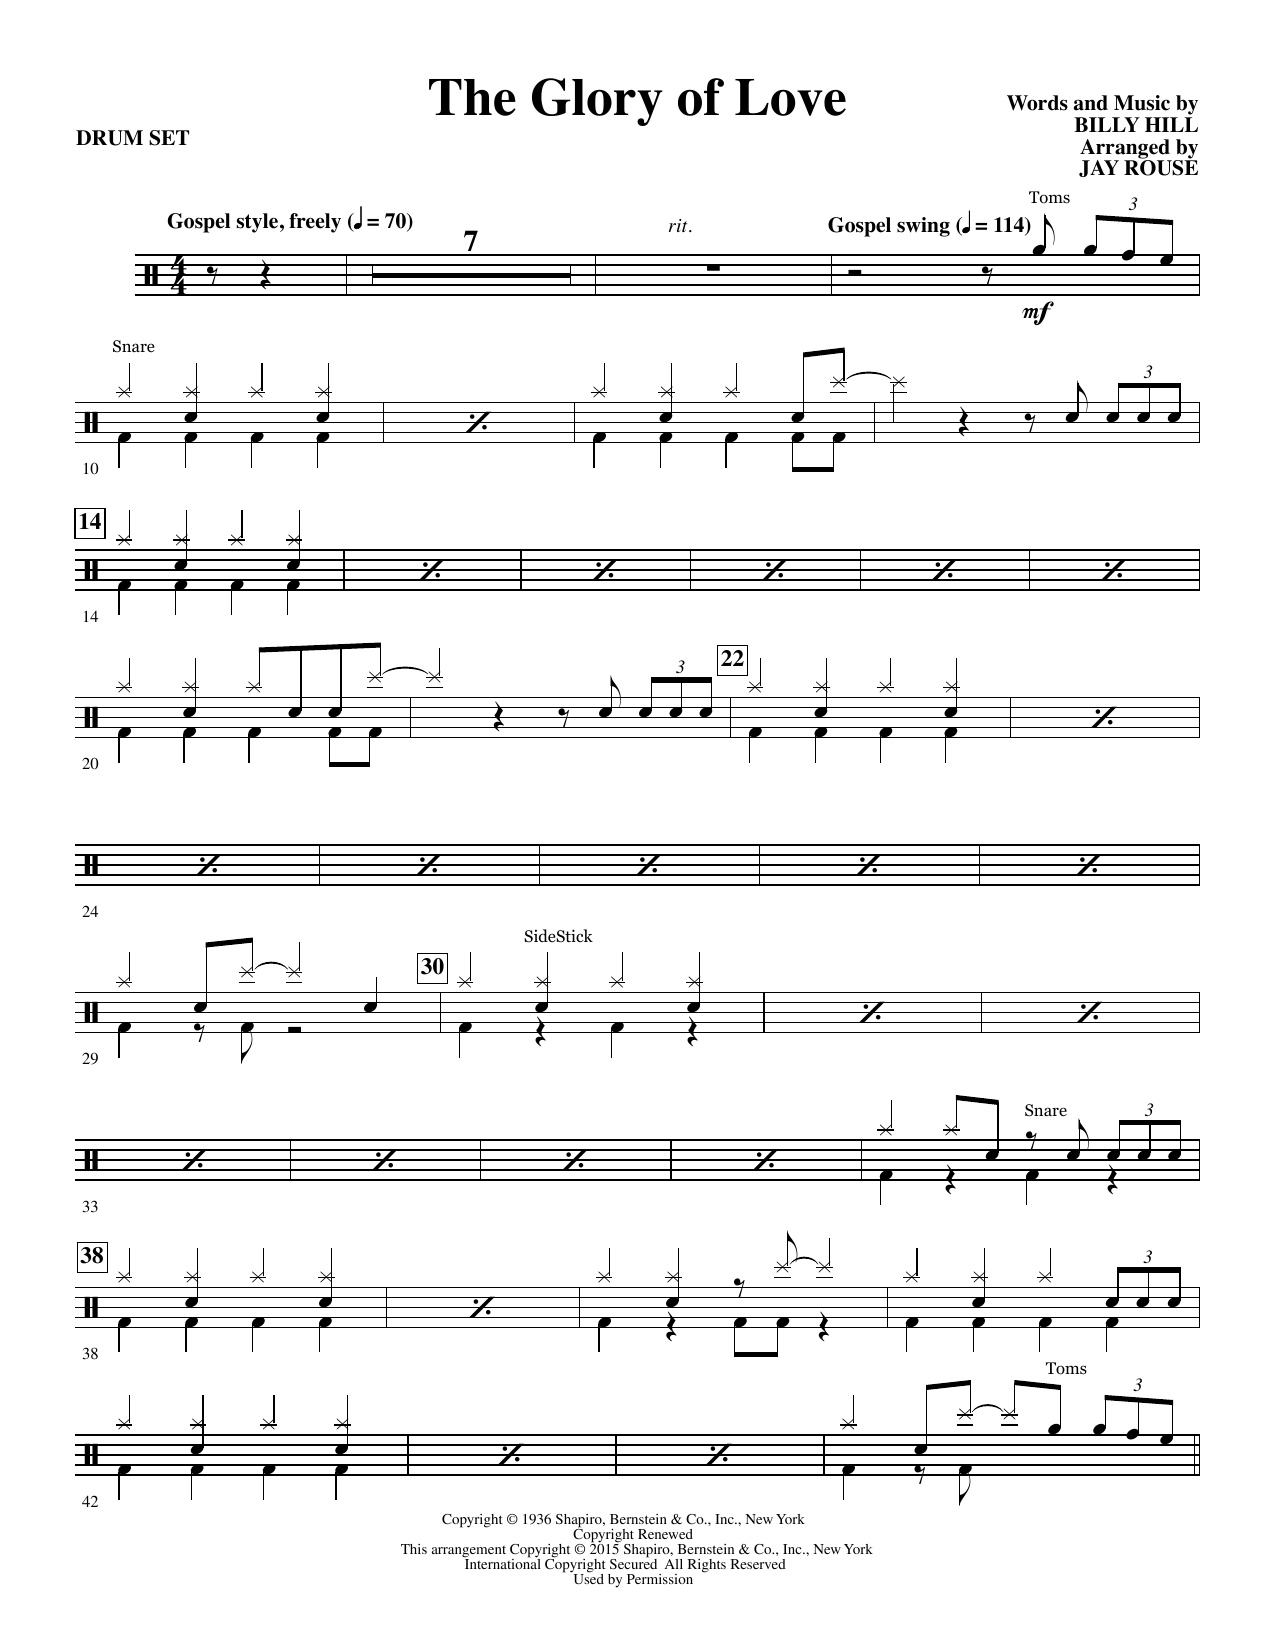 Jay Rouse The Glory of Love - Drum Set sheet music notes and chords. Download Printable PDF.